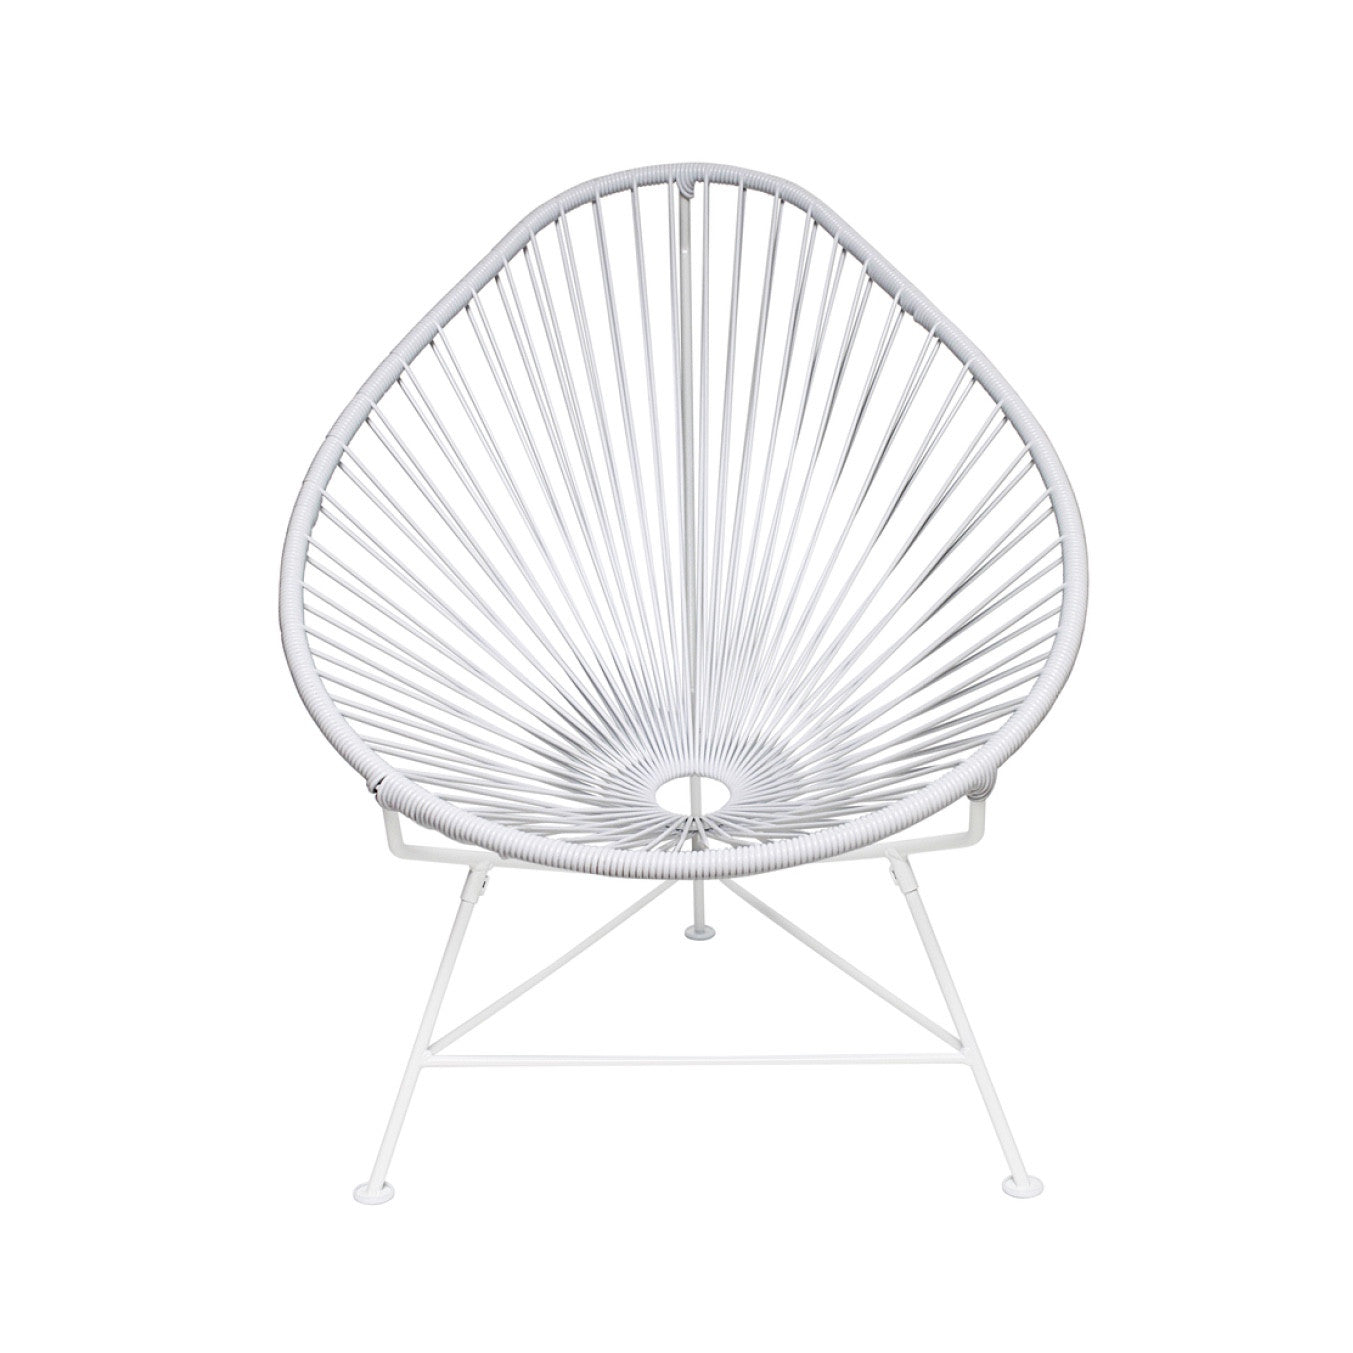  Acapulco Chair - White on White Frame, ID-Innit Design, Putti Fine Furnishings